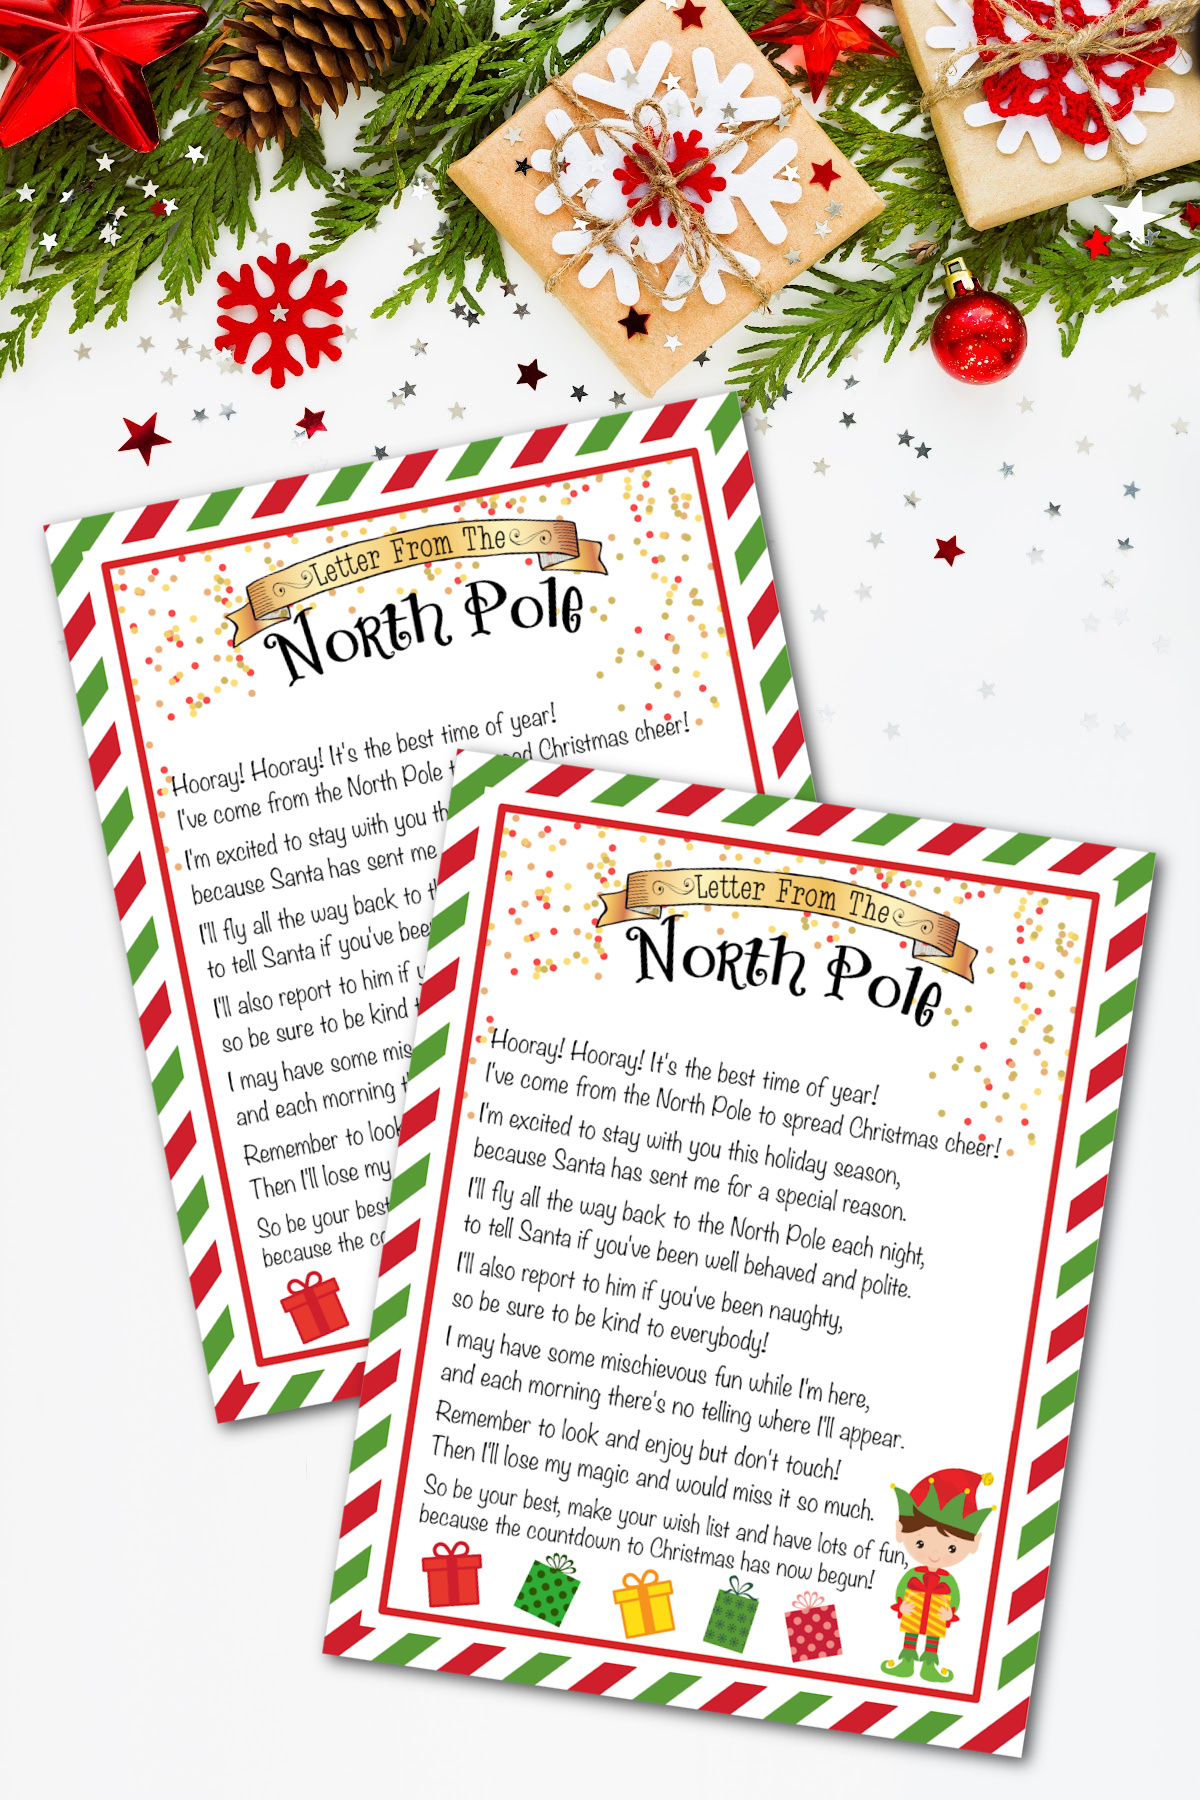 Two christmas letters with a poem on them.